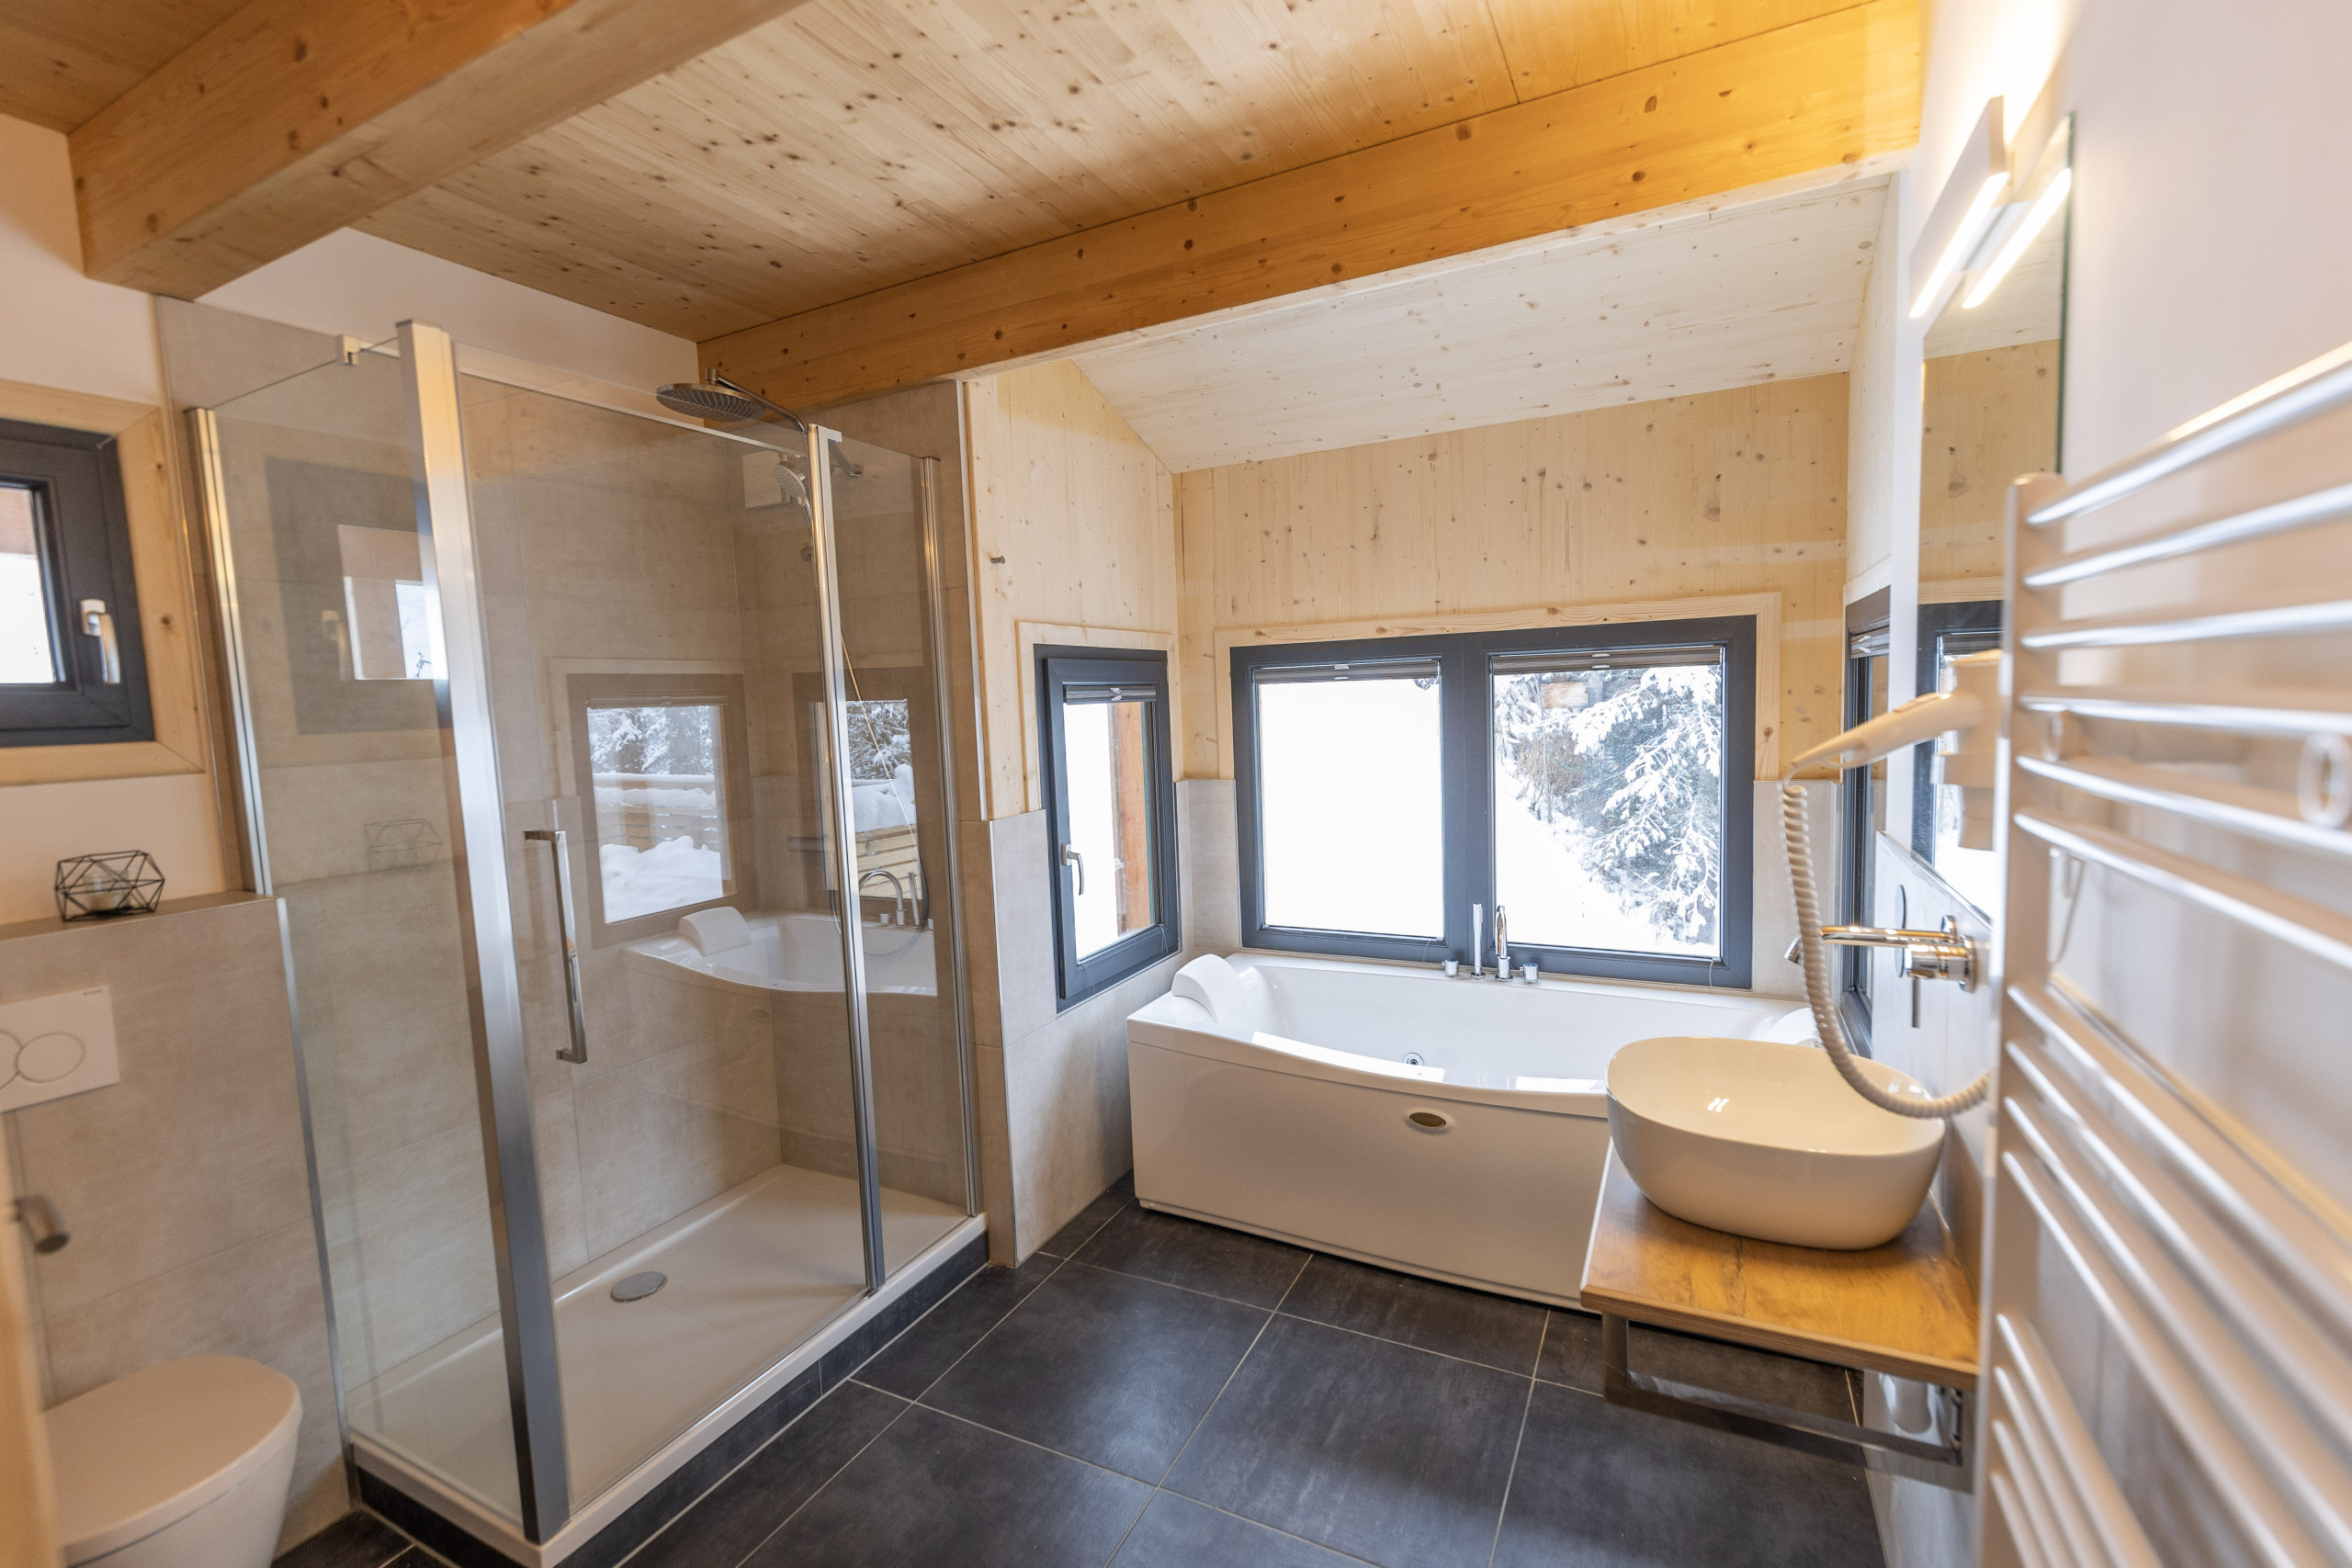  in Turrach - Chalet # 15 with sauna and  whirlpool